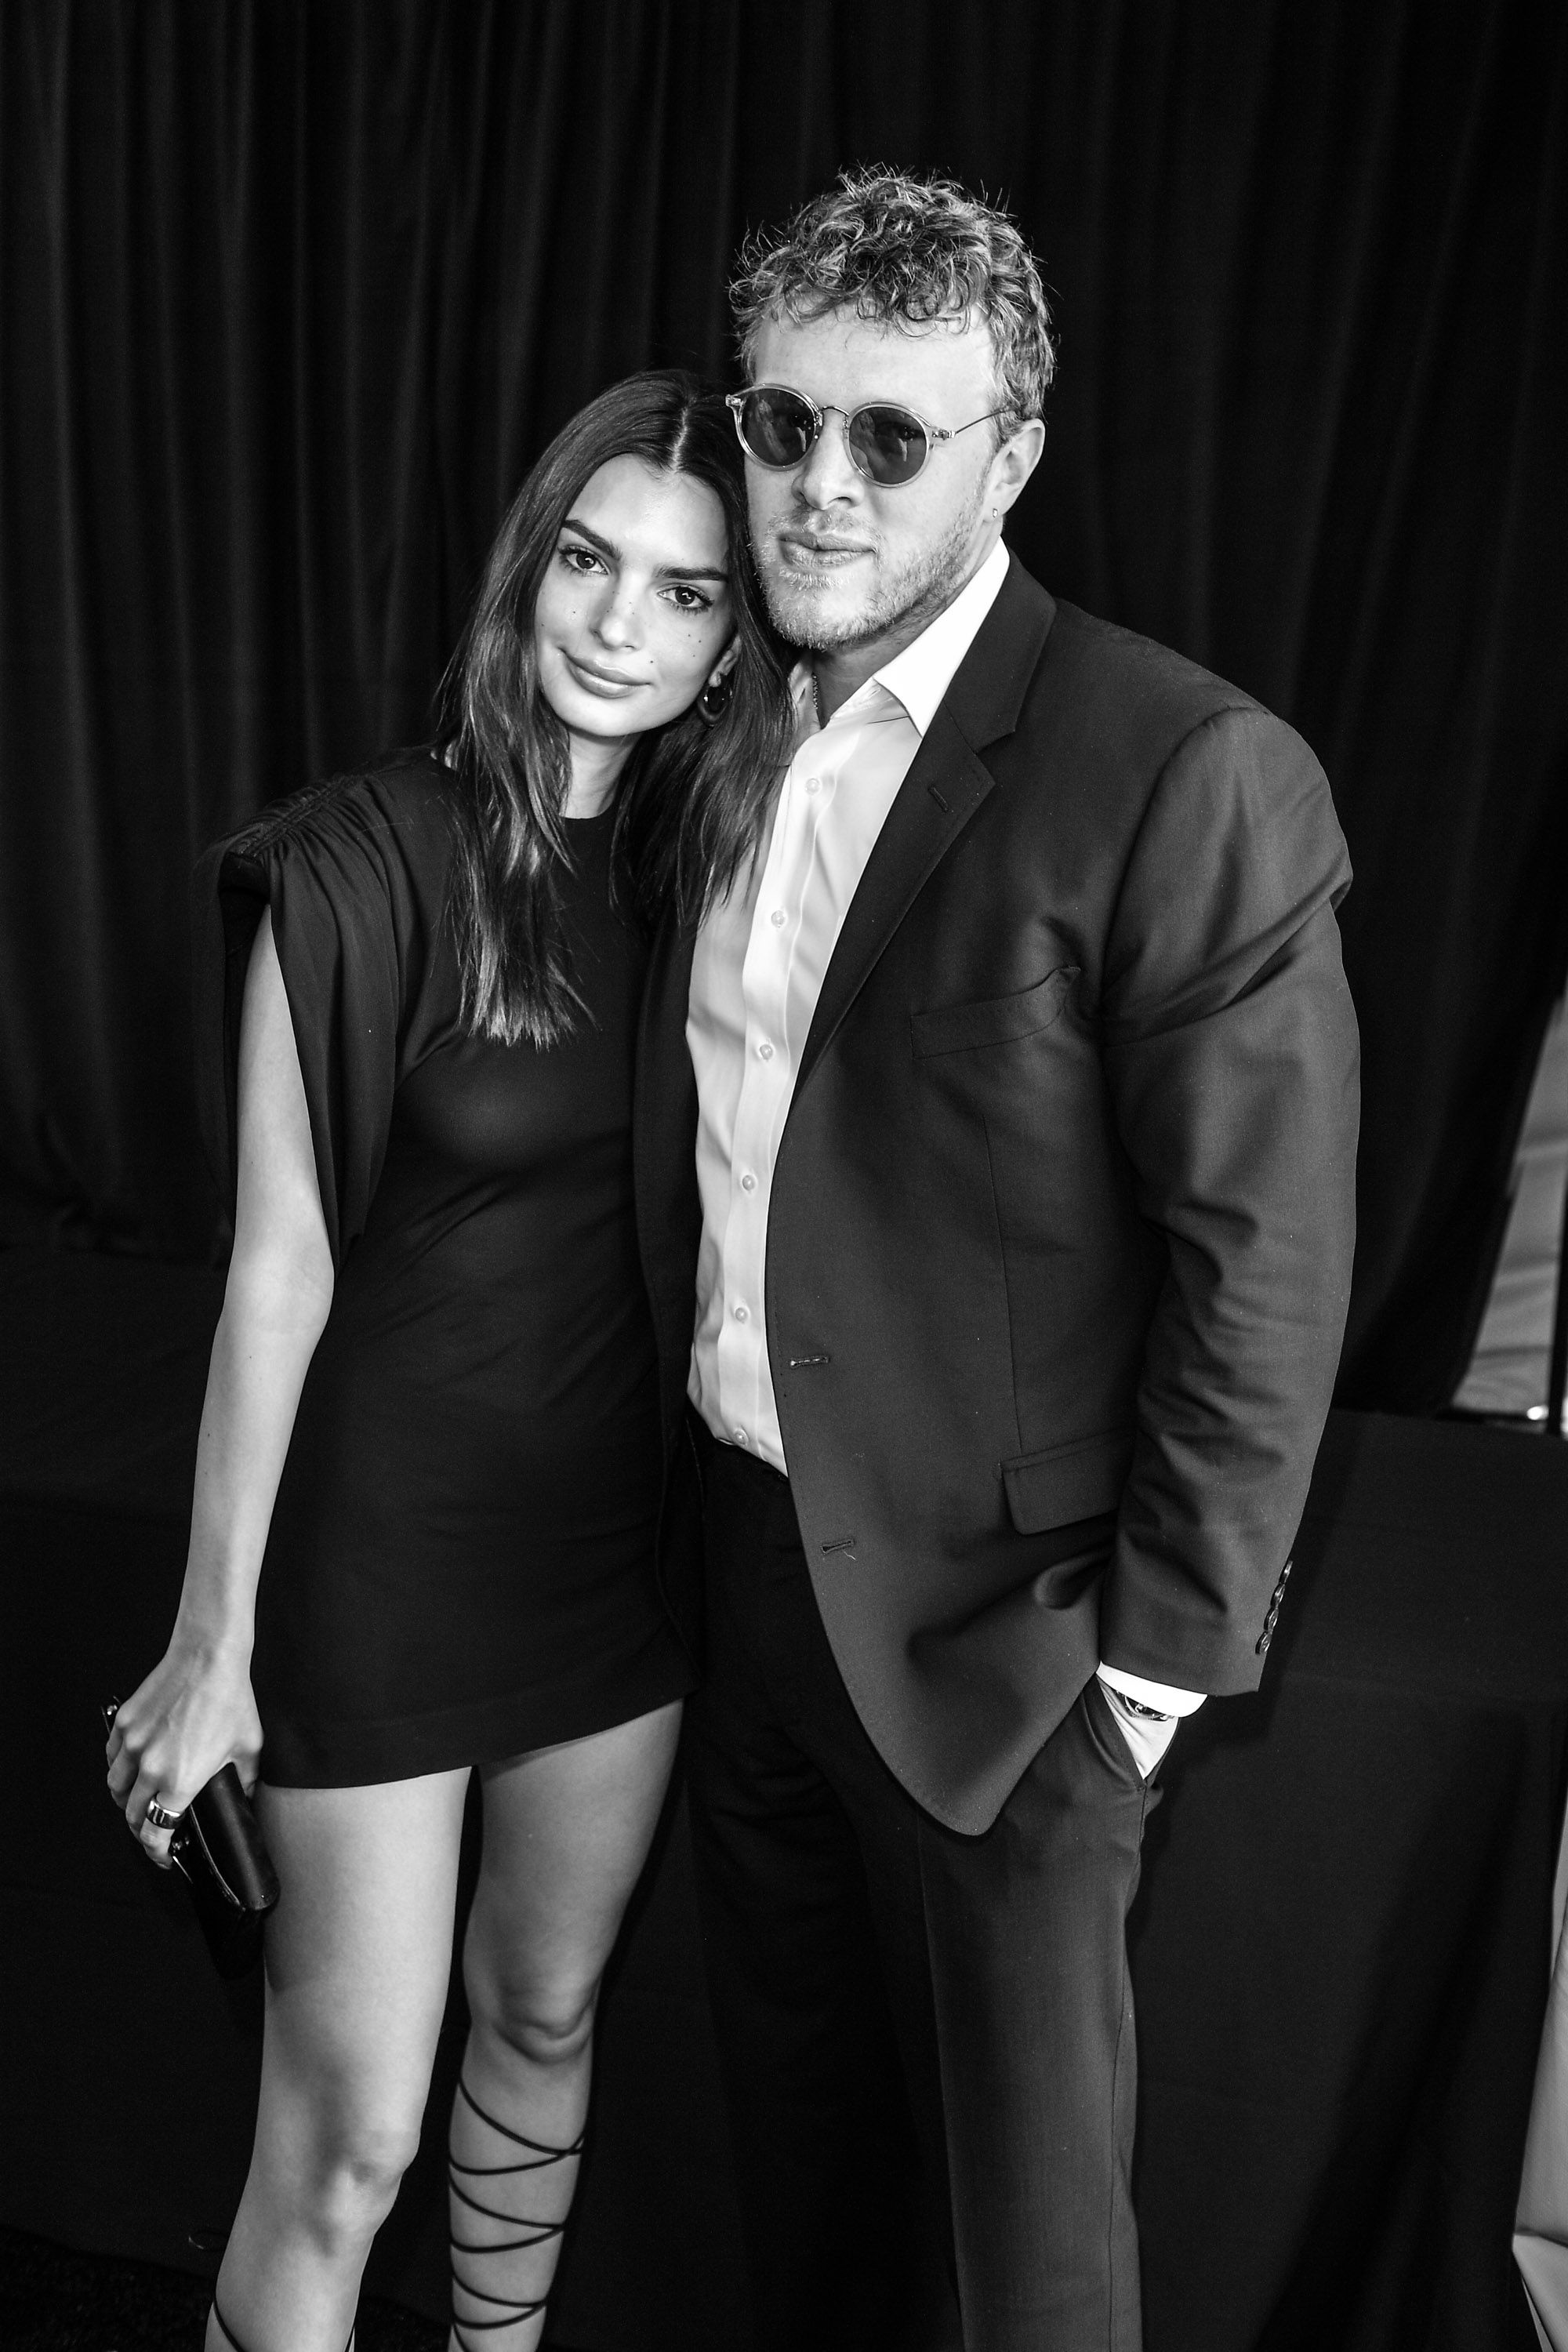 santa monica, california   february 08 editors note image converted in black and white emily ratajkowski and sebastian bear mcclard attend the 2020 film independent spirit awards on february 08, 2020 in santa monica, california photo by george pimentelgetty images